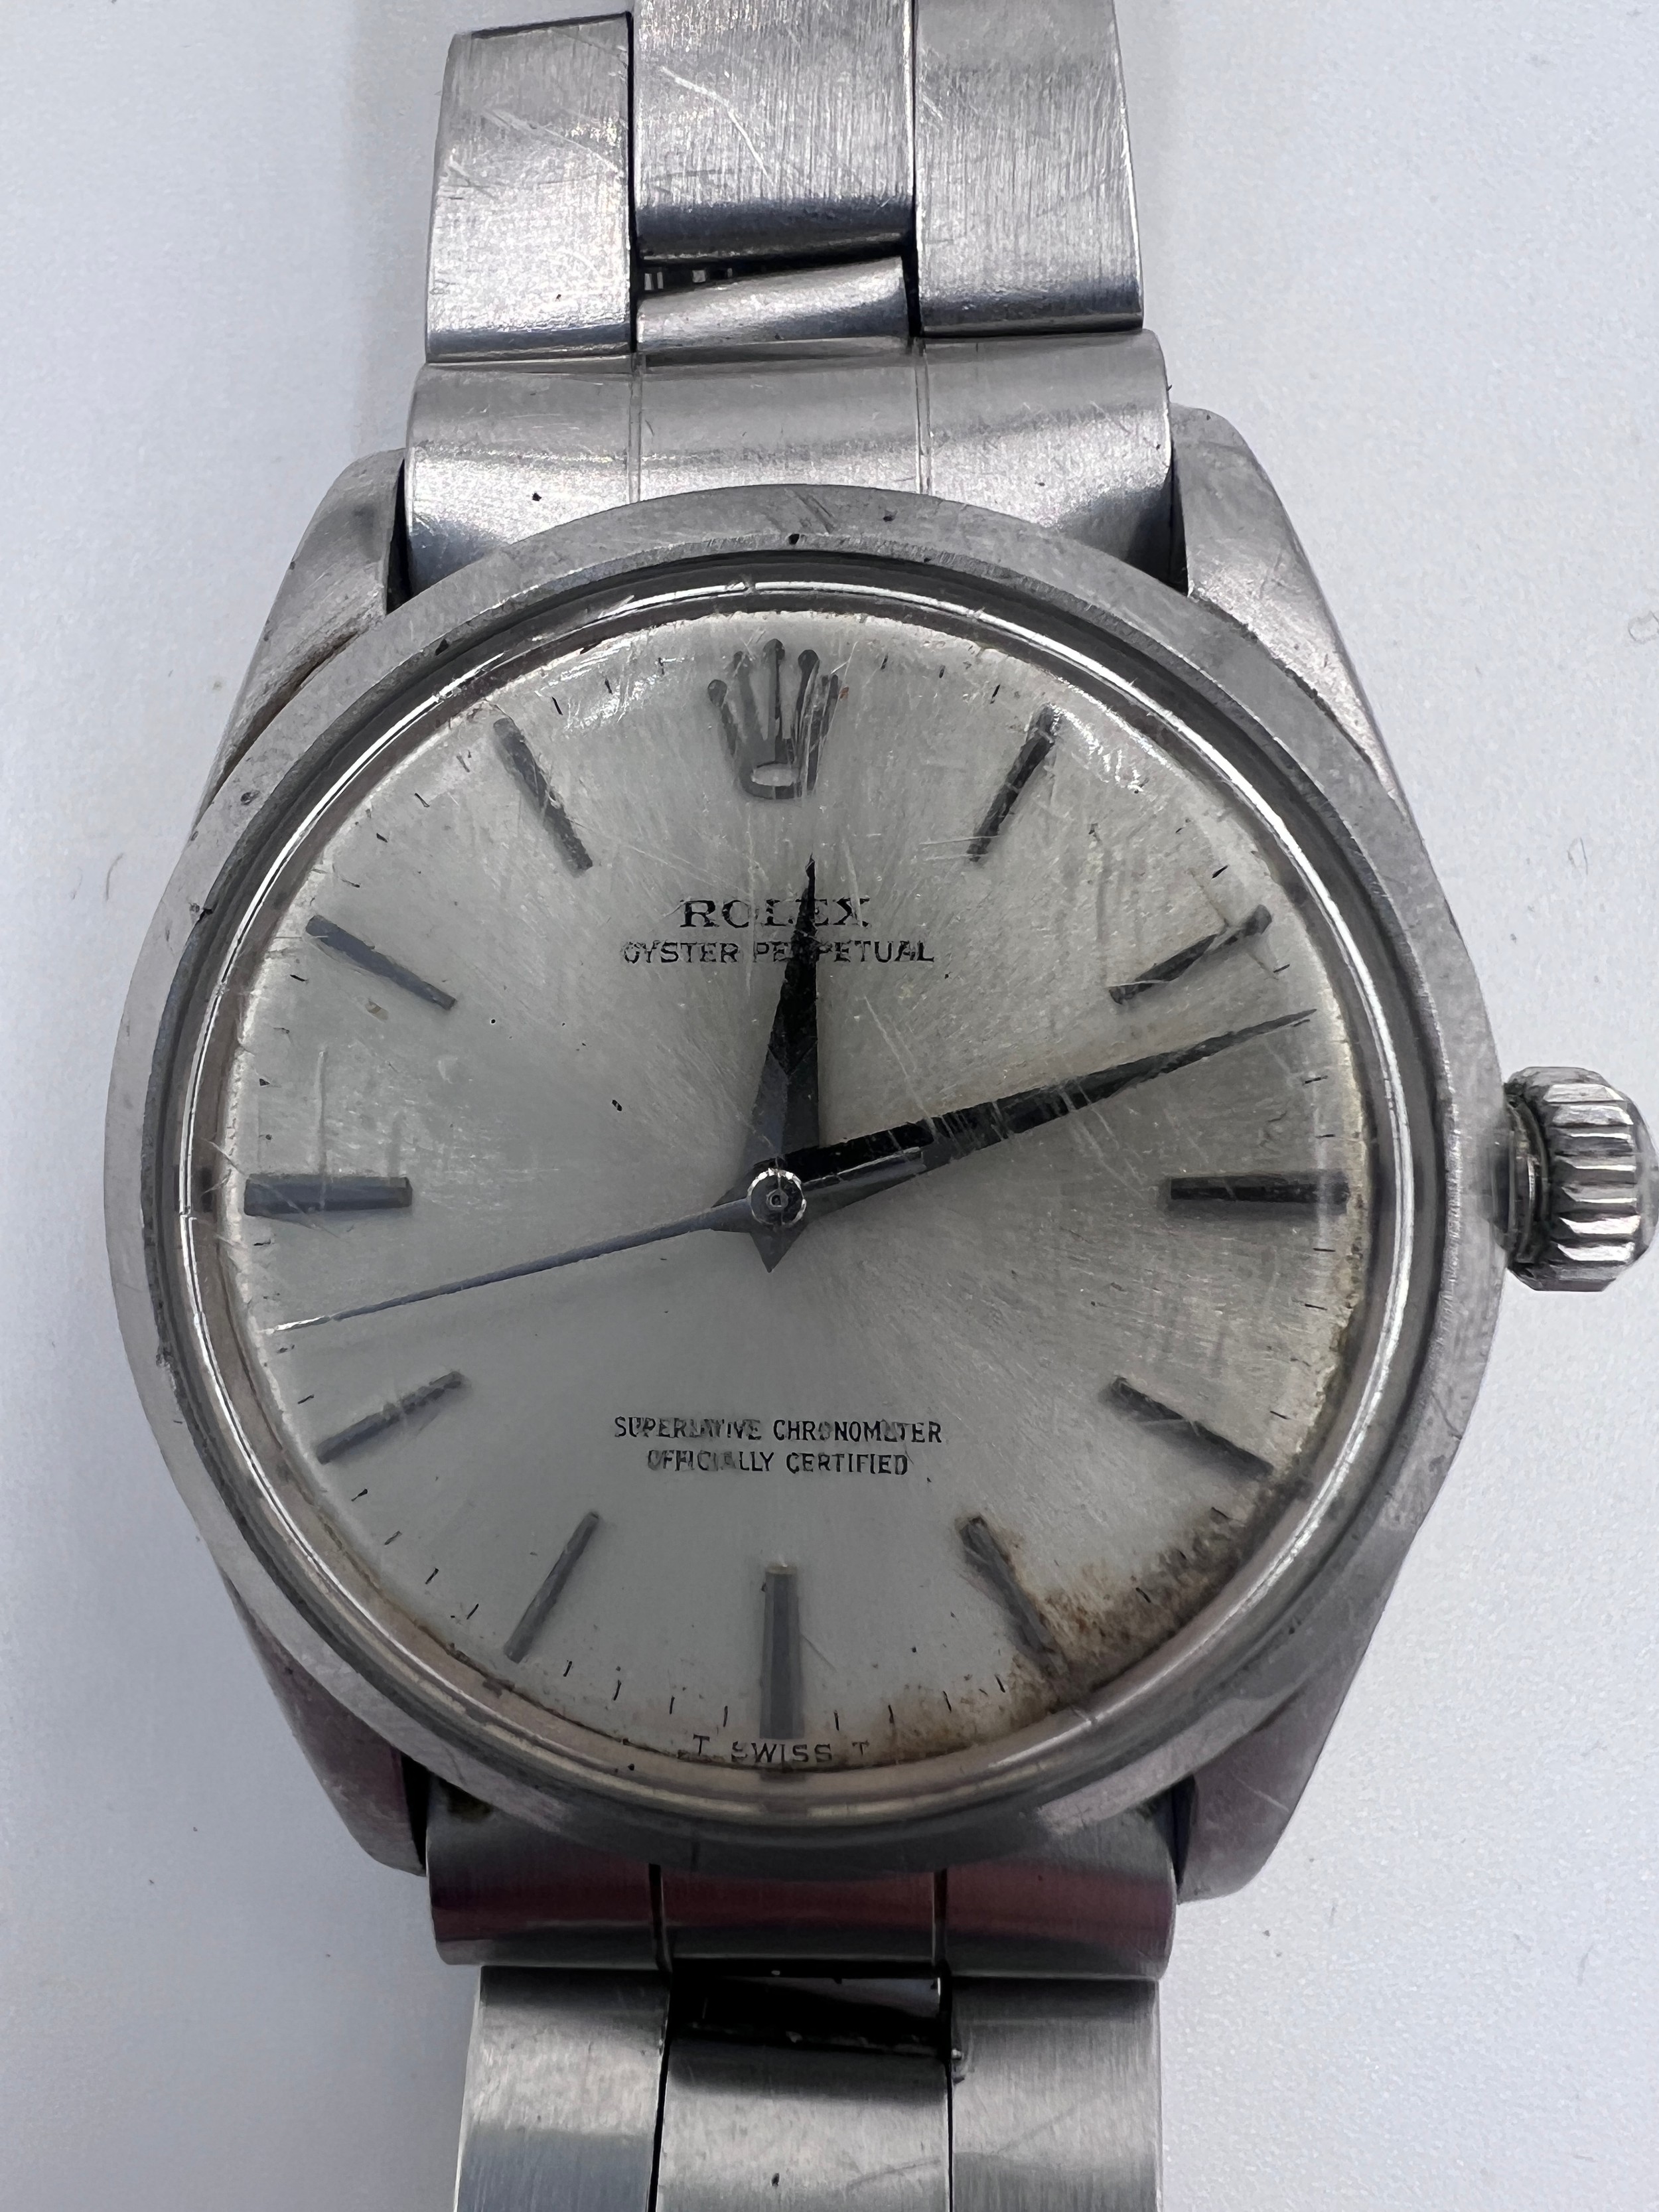 A 1964 Rolex Oyster Perpetual wristwatch on Rolex Stainless steel bracelet. Model: 1002. Ref: - Image 2 of 7